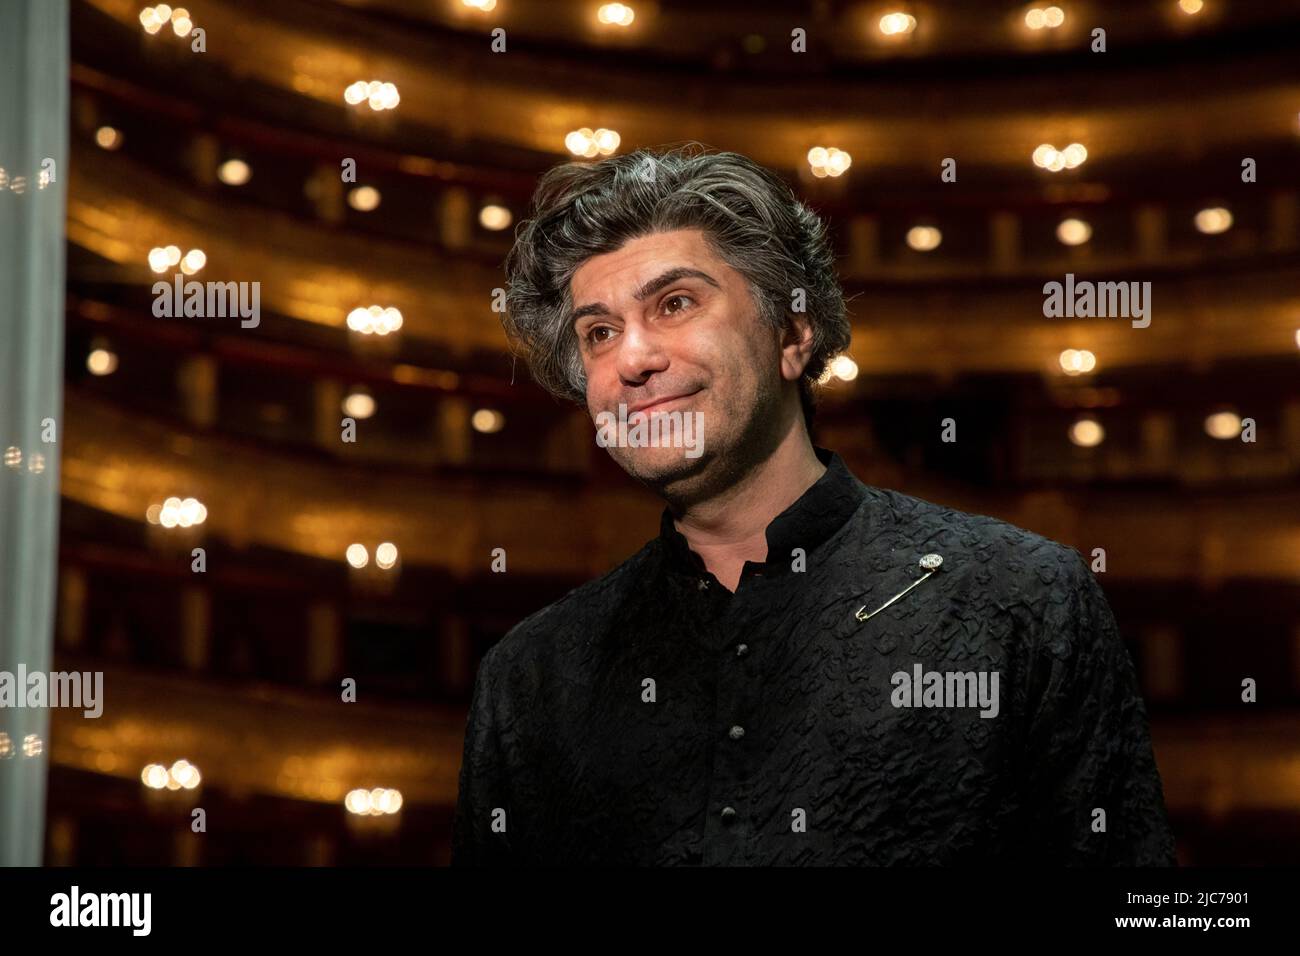 Moscow, Russia. 10th of June, 2022 Nikolai Tsiskaridze, acting rector of the Vaganova Ballet Academy, speaks to media prior to the final tour of XIV International Ballet Competition on the Bolshoi theatre historical stage in Moscow, Russia Stock Photo